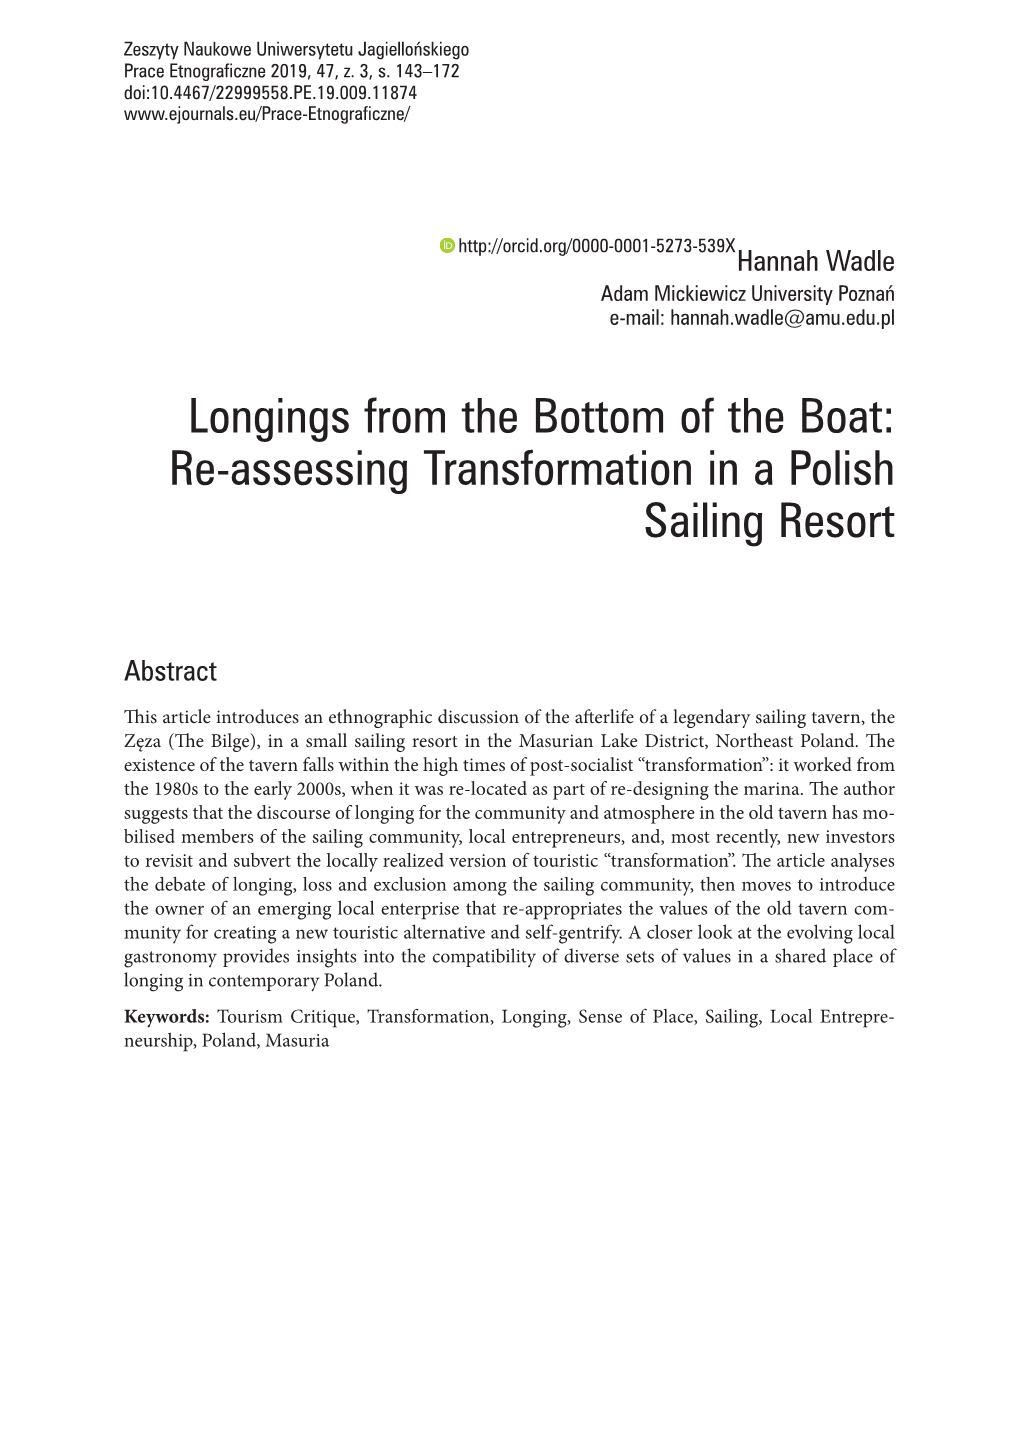 Re-Assessing Transformation in a Polish Sailing Resort